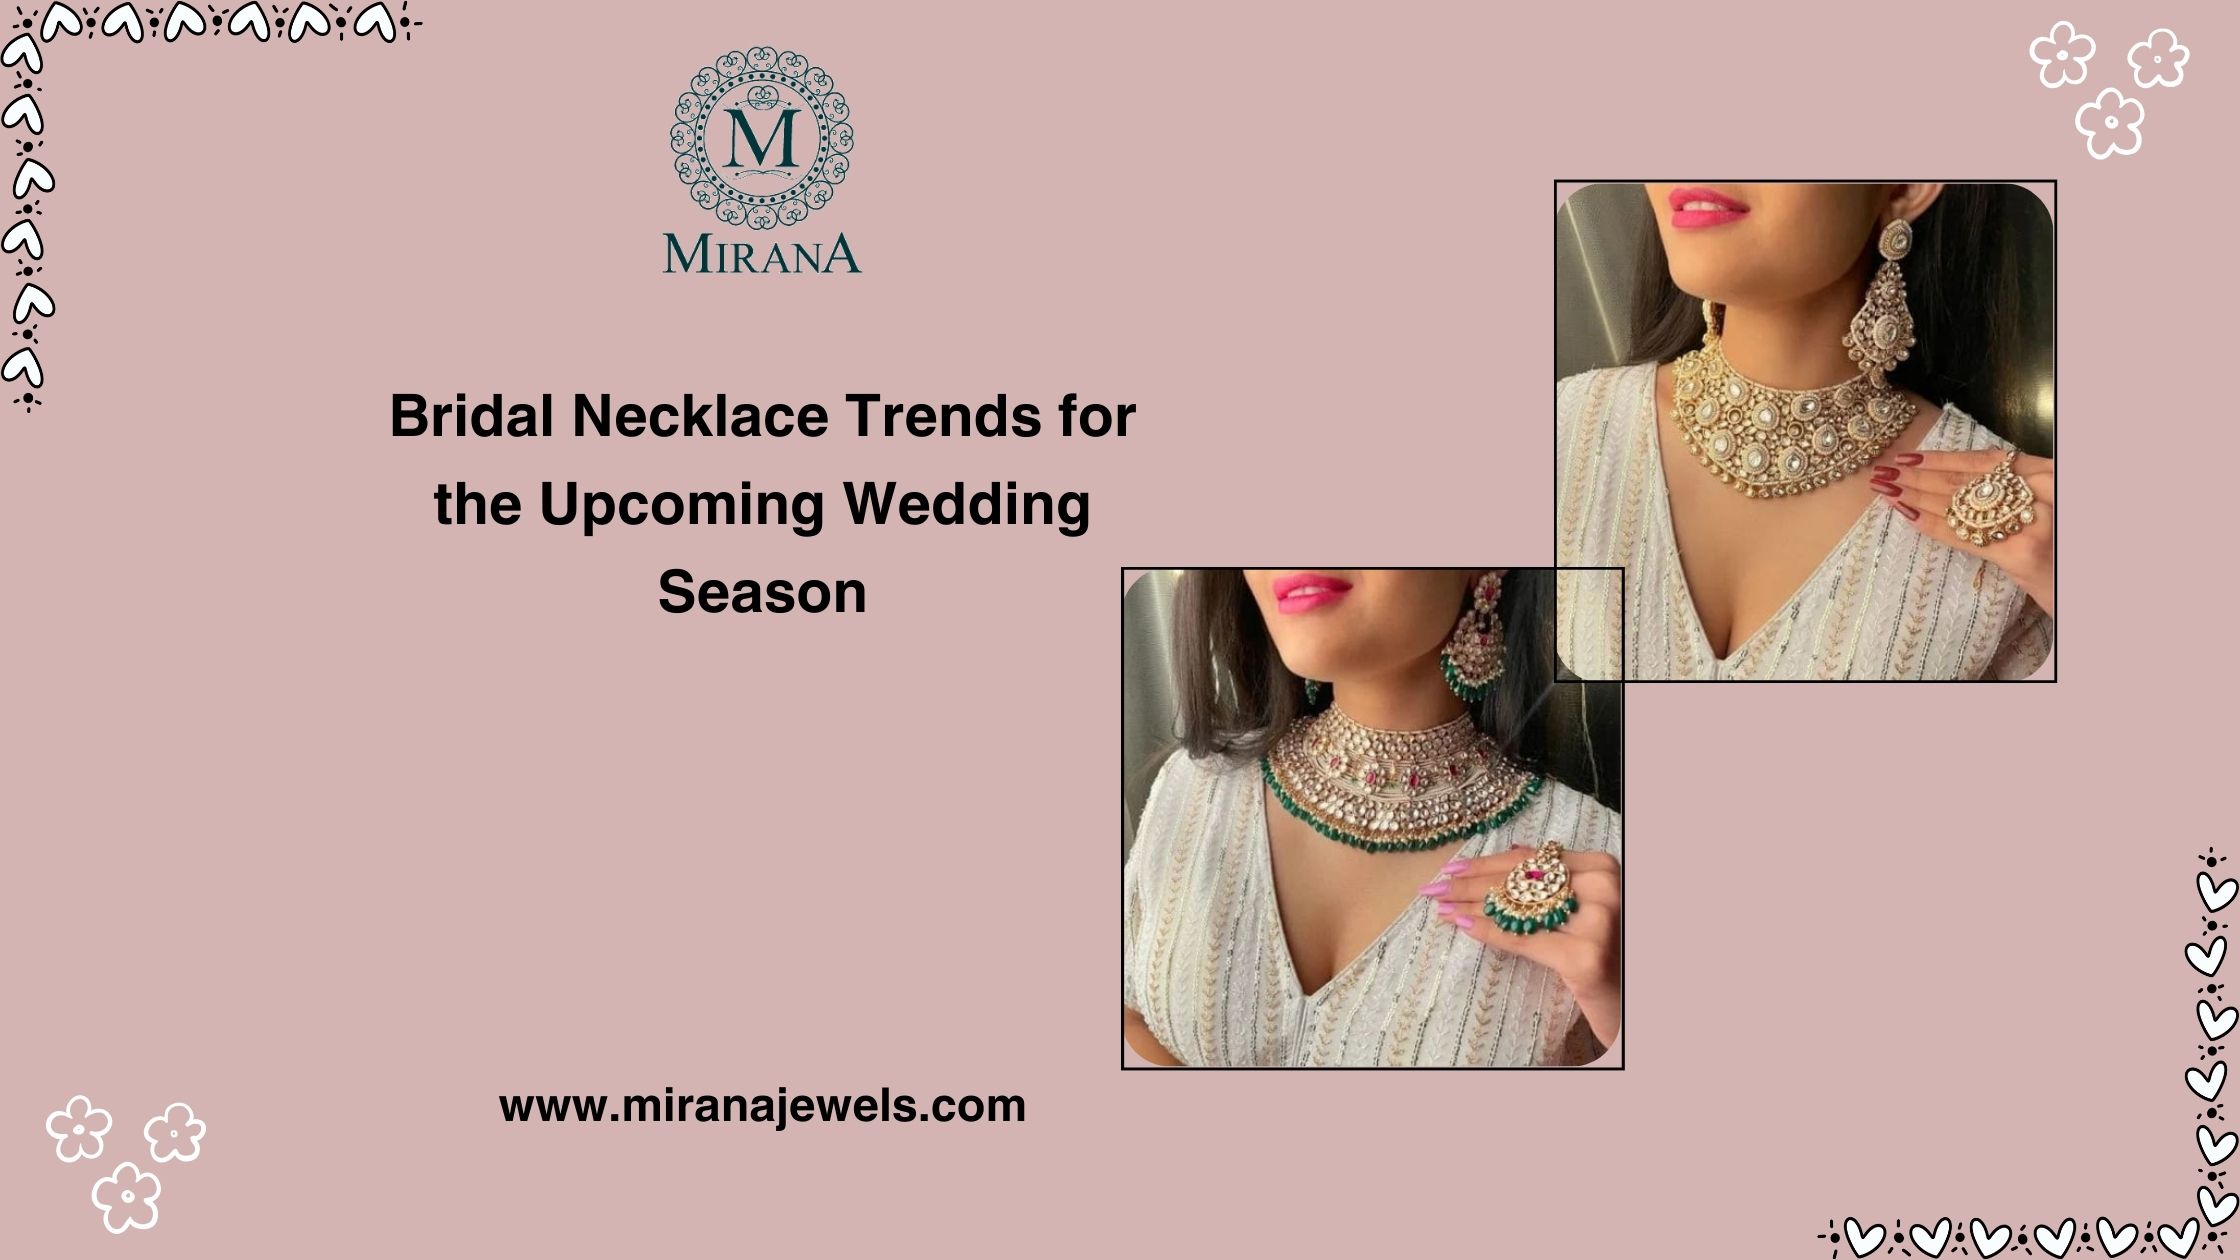 Bridal Necklace Trends for the Upcoming Wedding Season